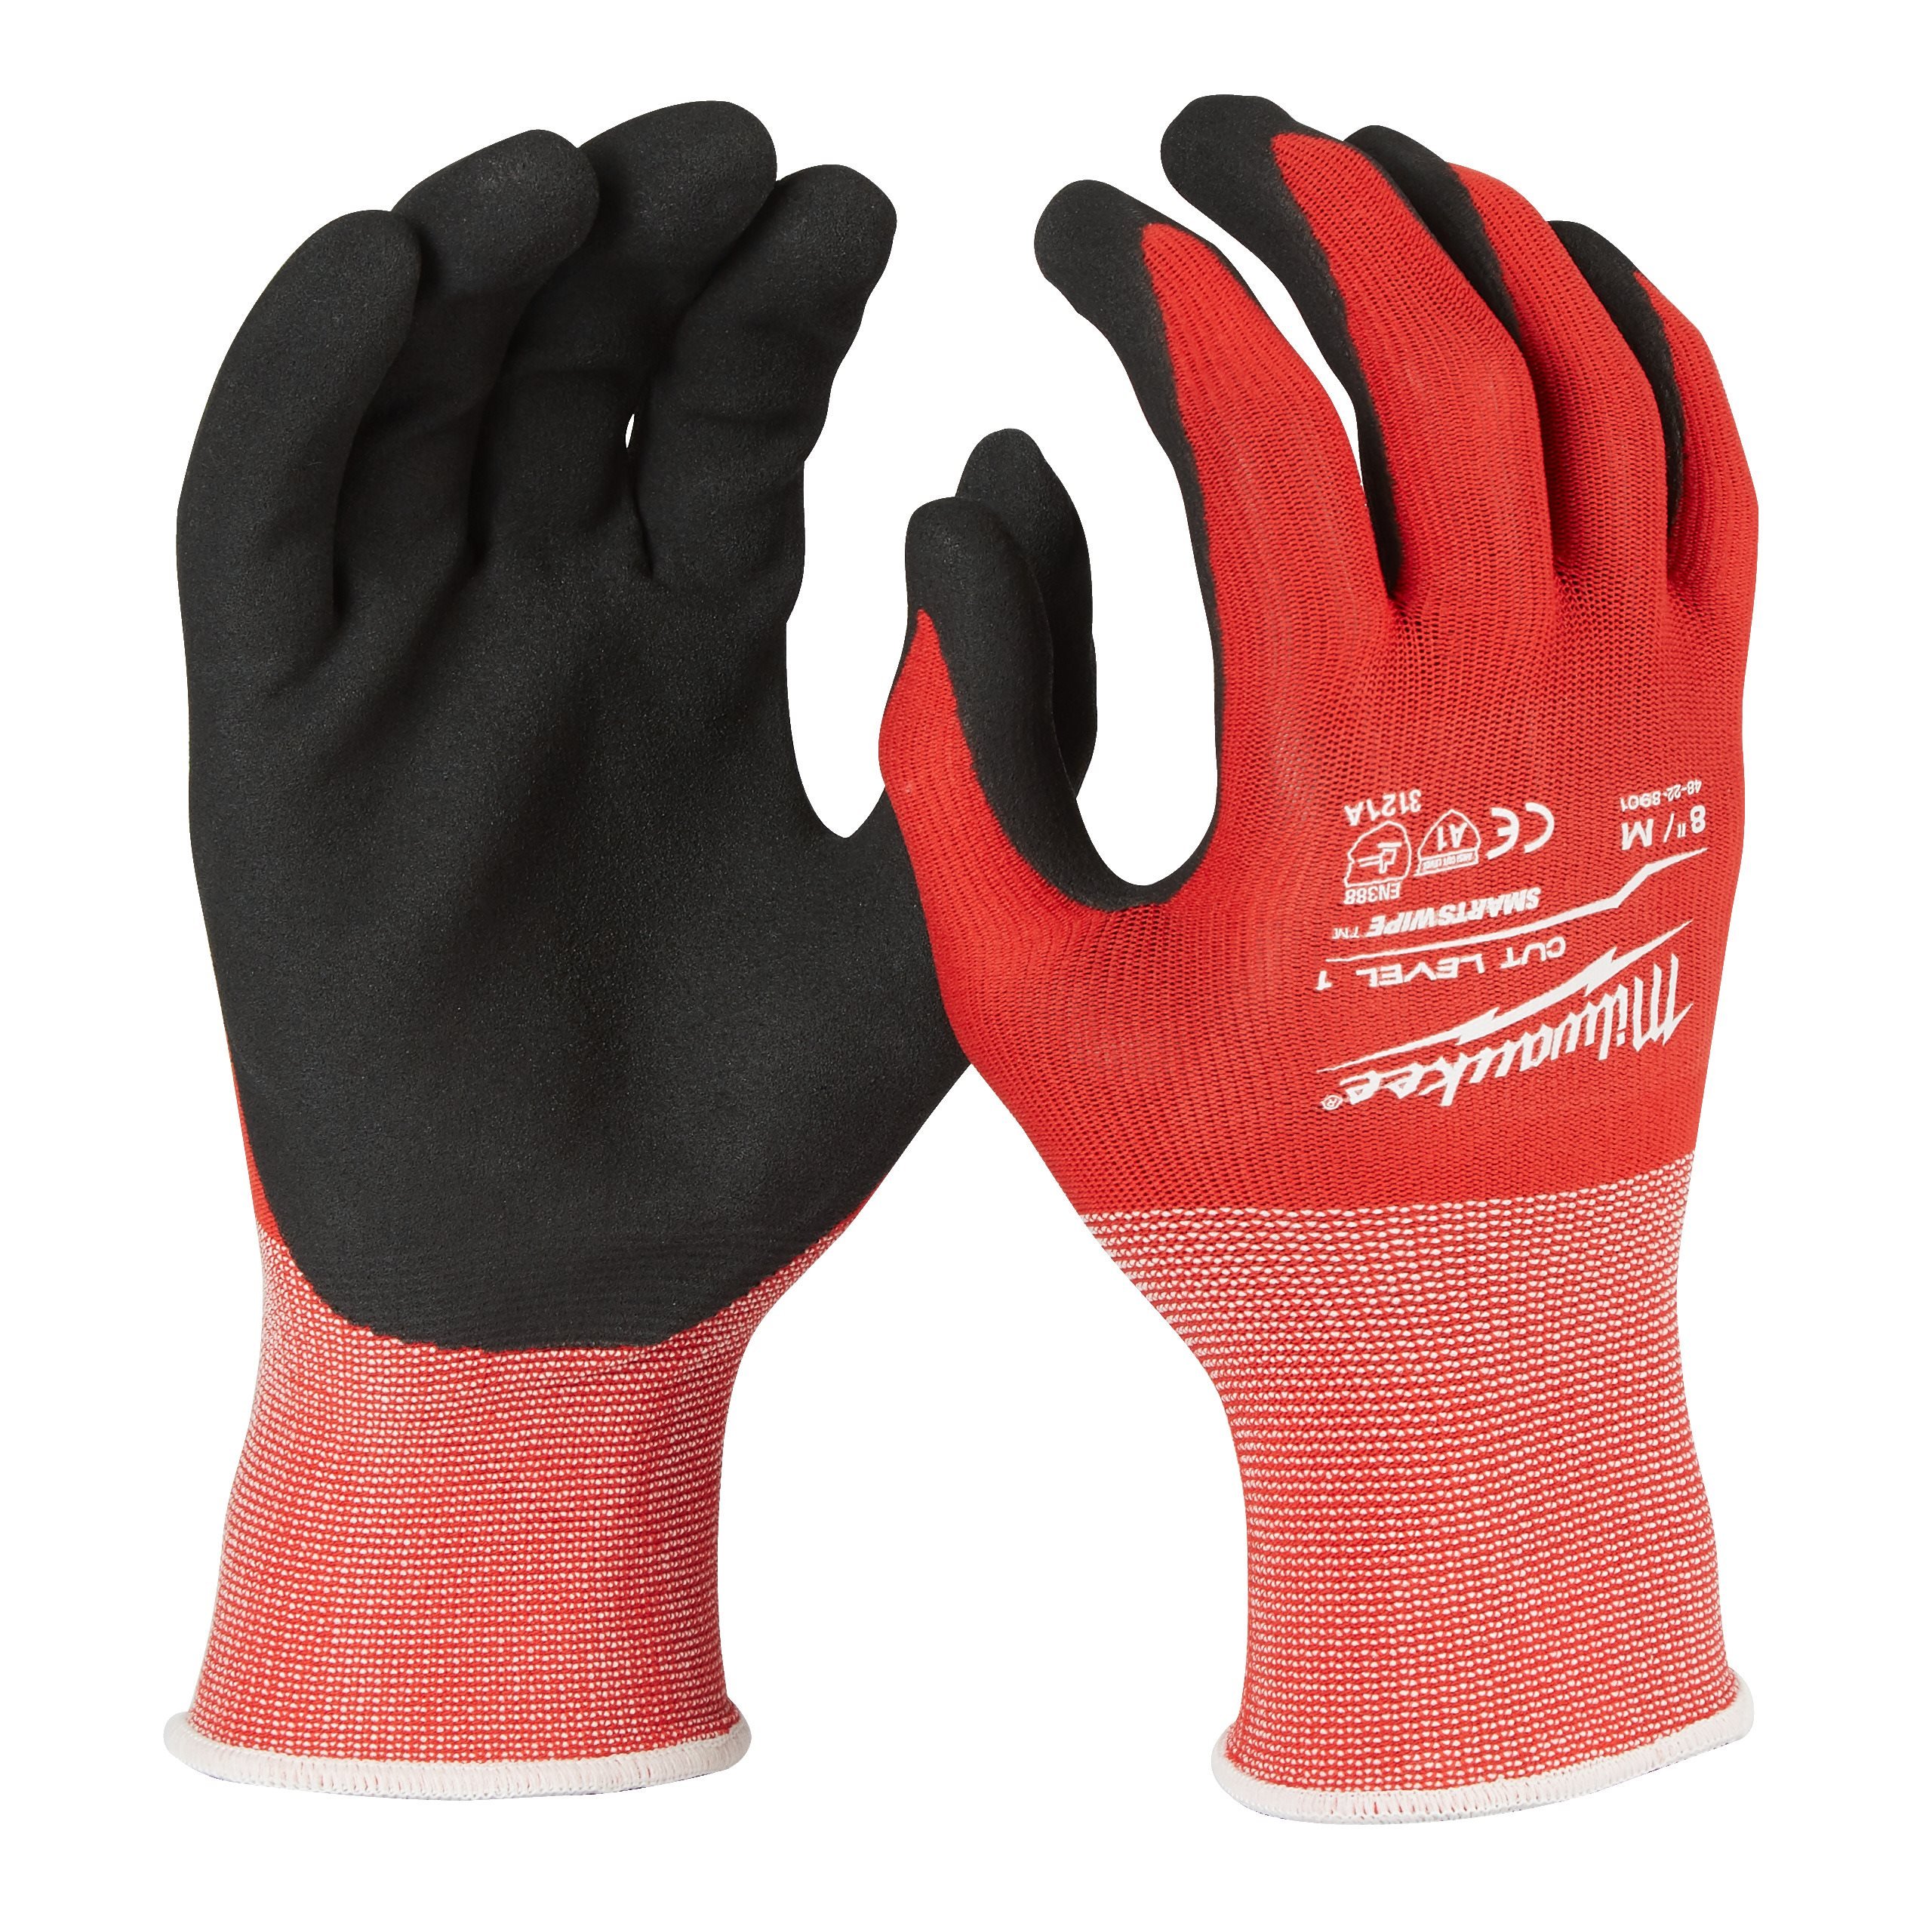 Cut level 1/A dipped gloves